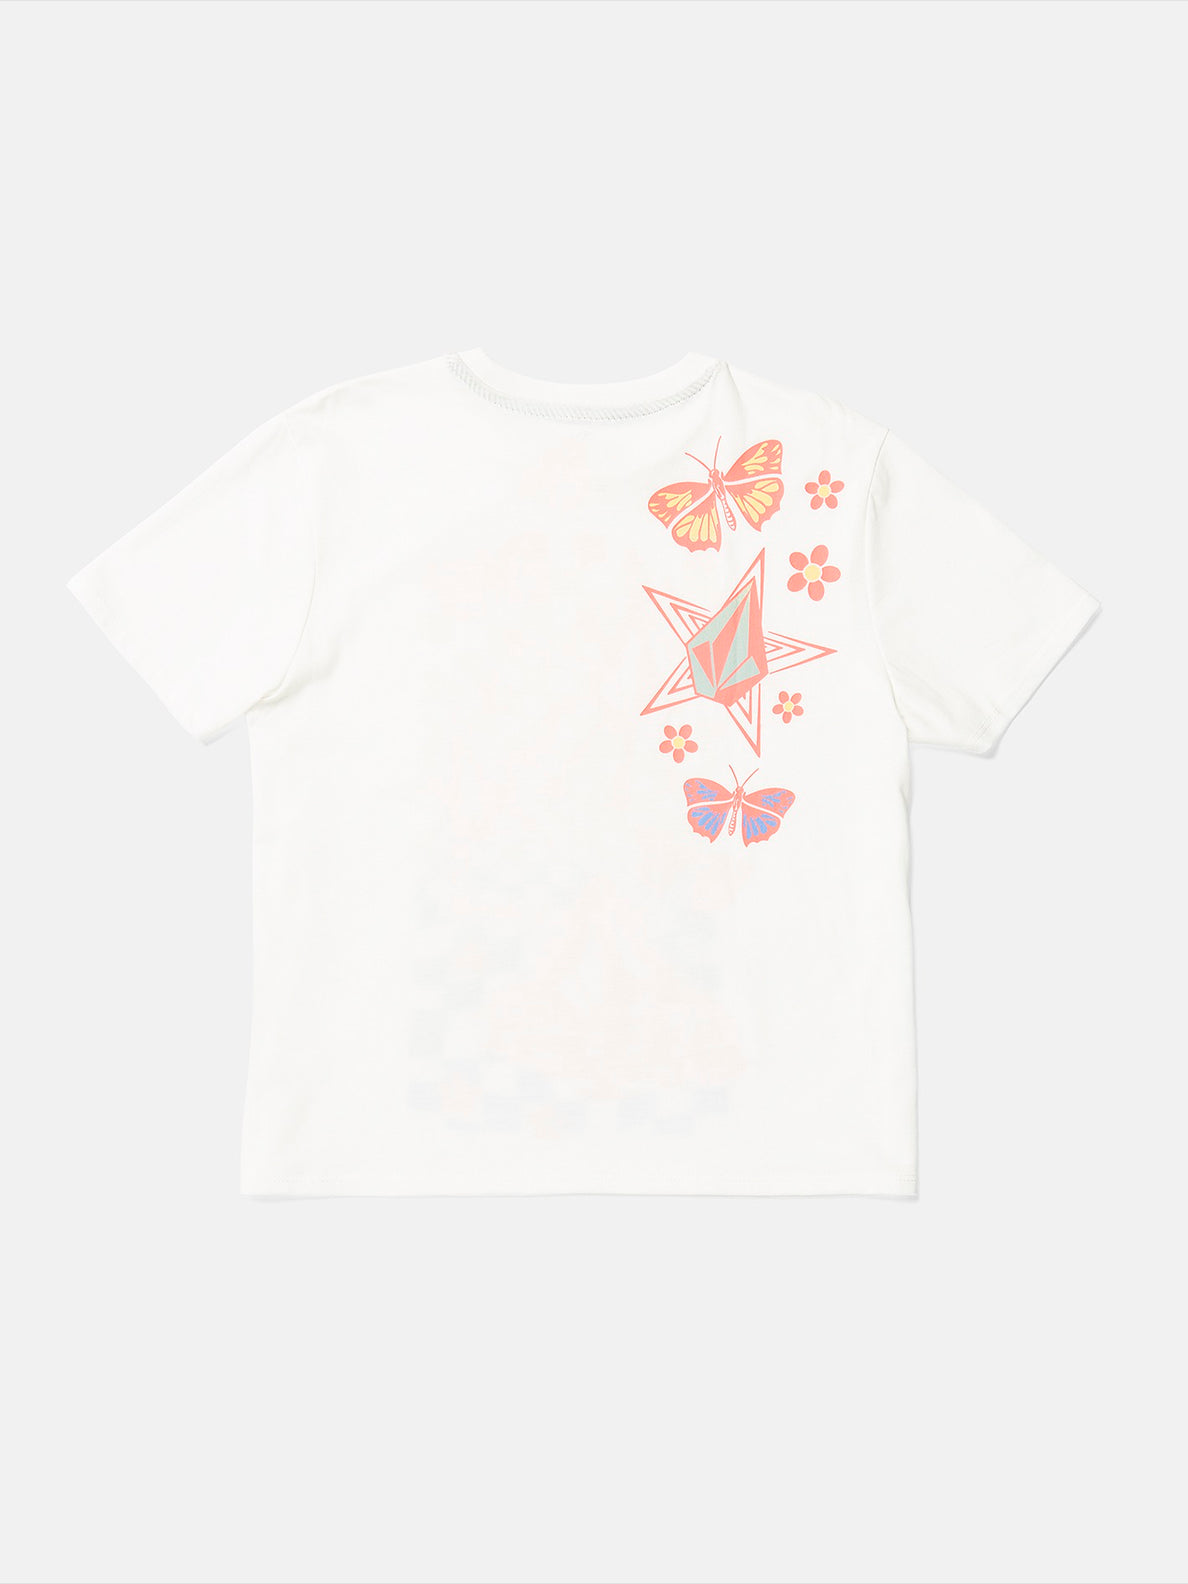 Truly Stoked Bf Tee - Star White